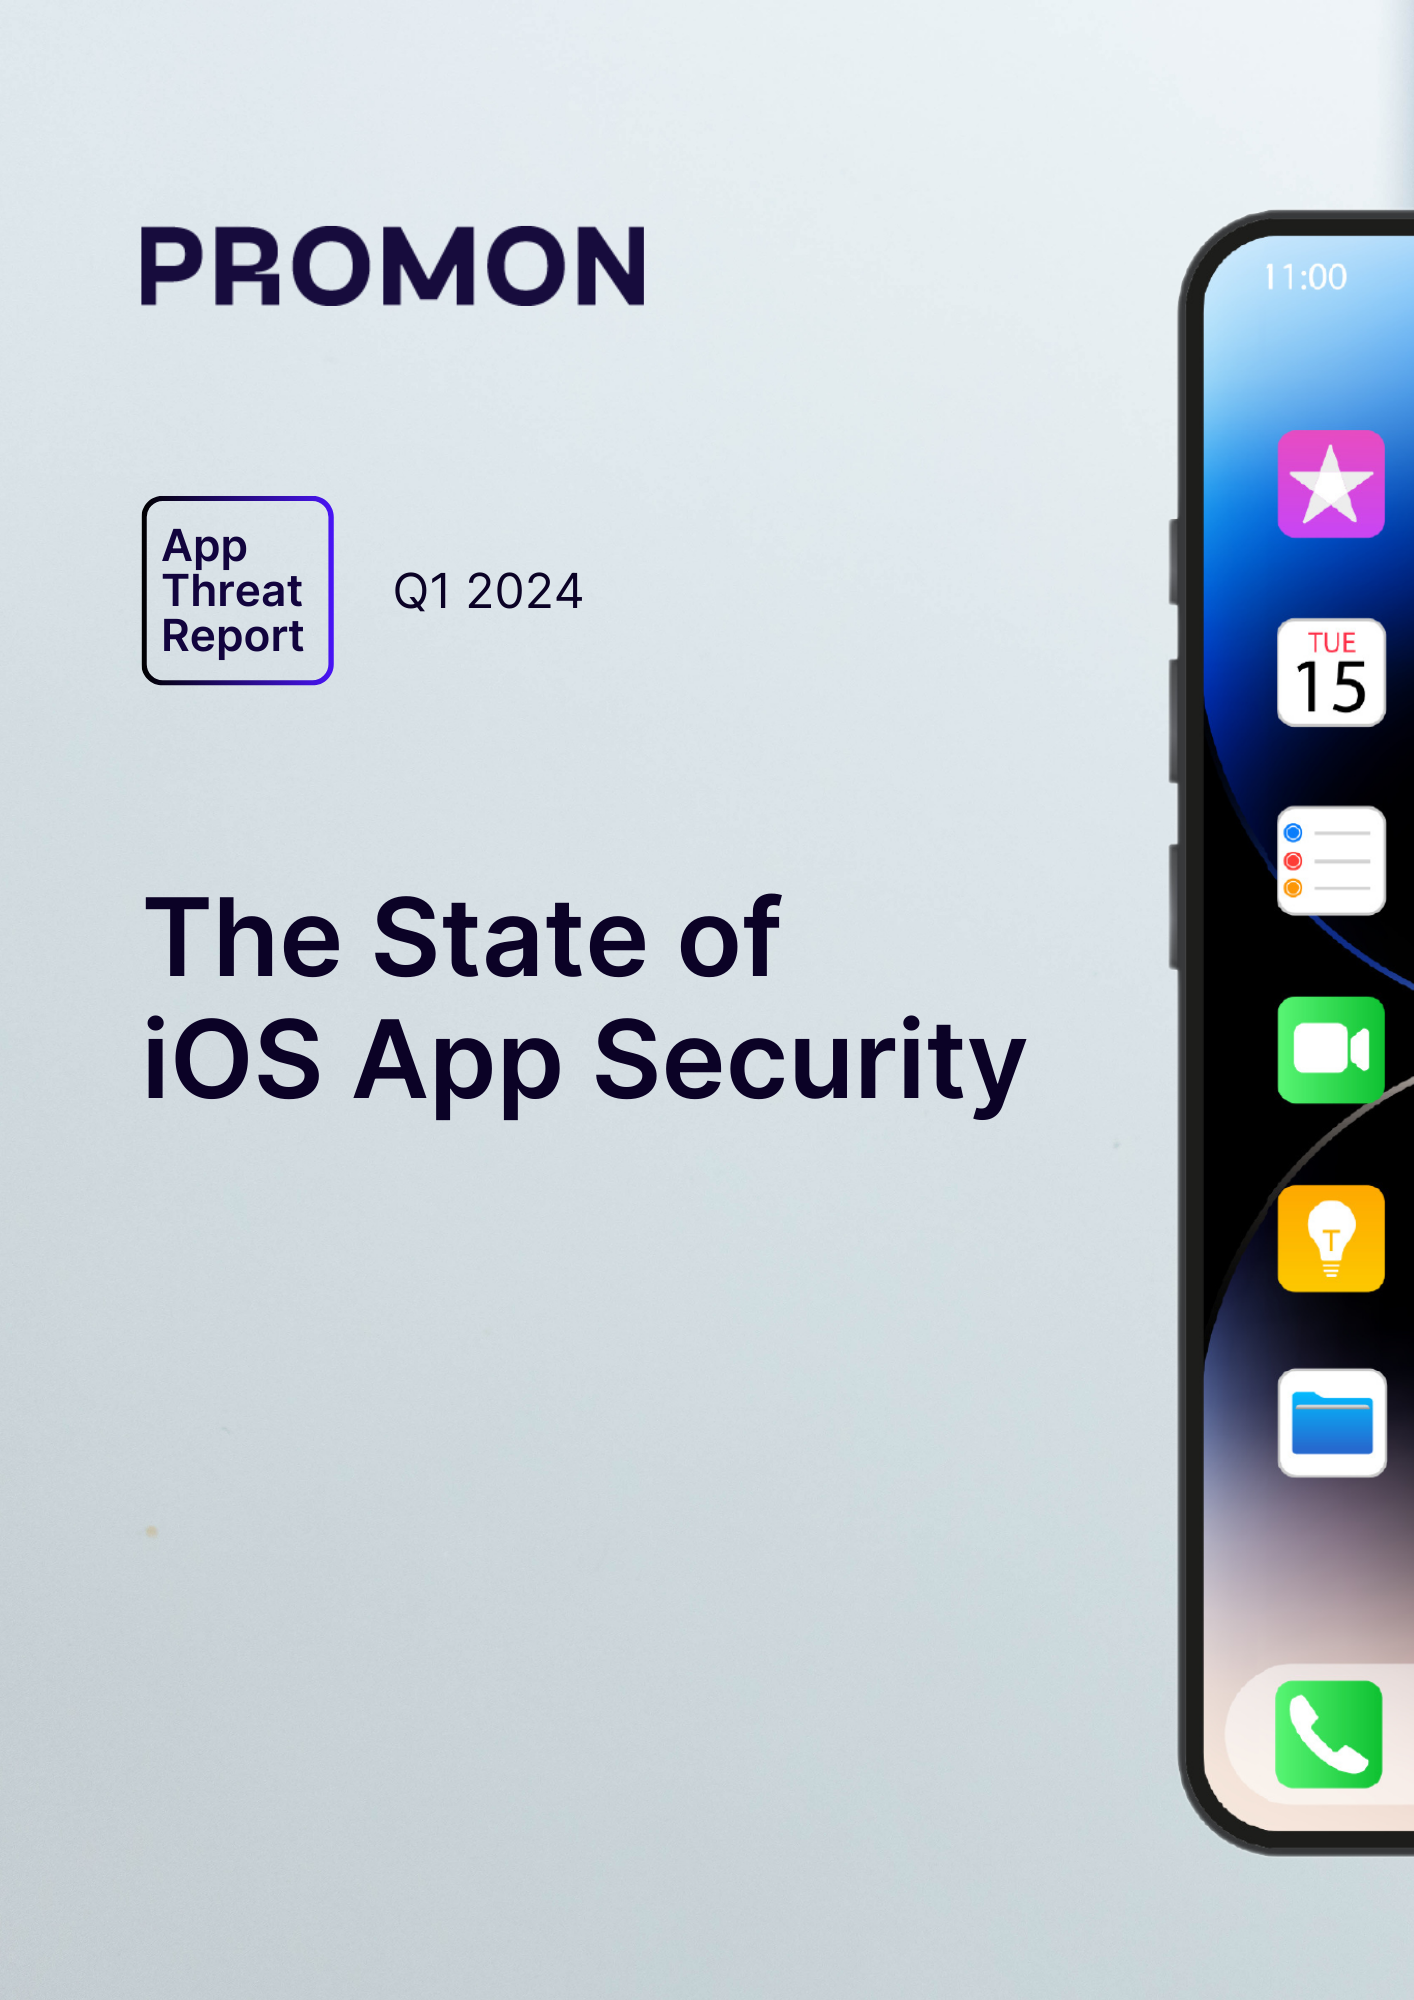 The State of iOS App Security